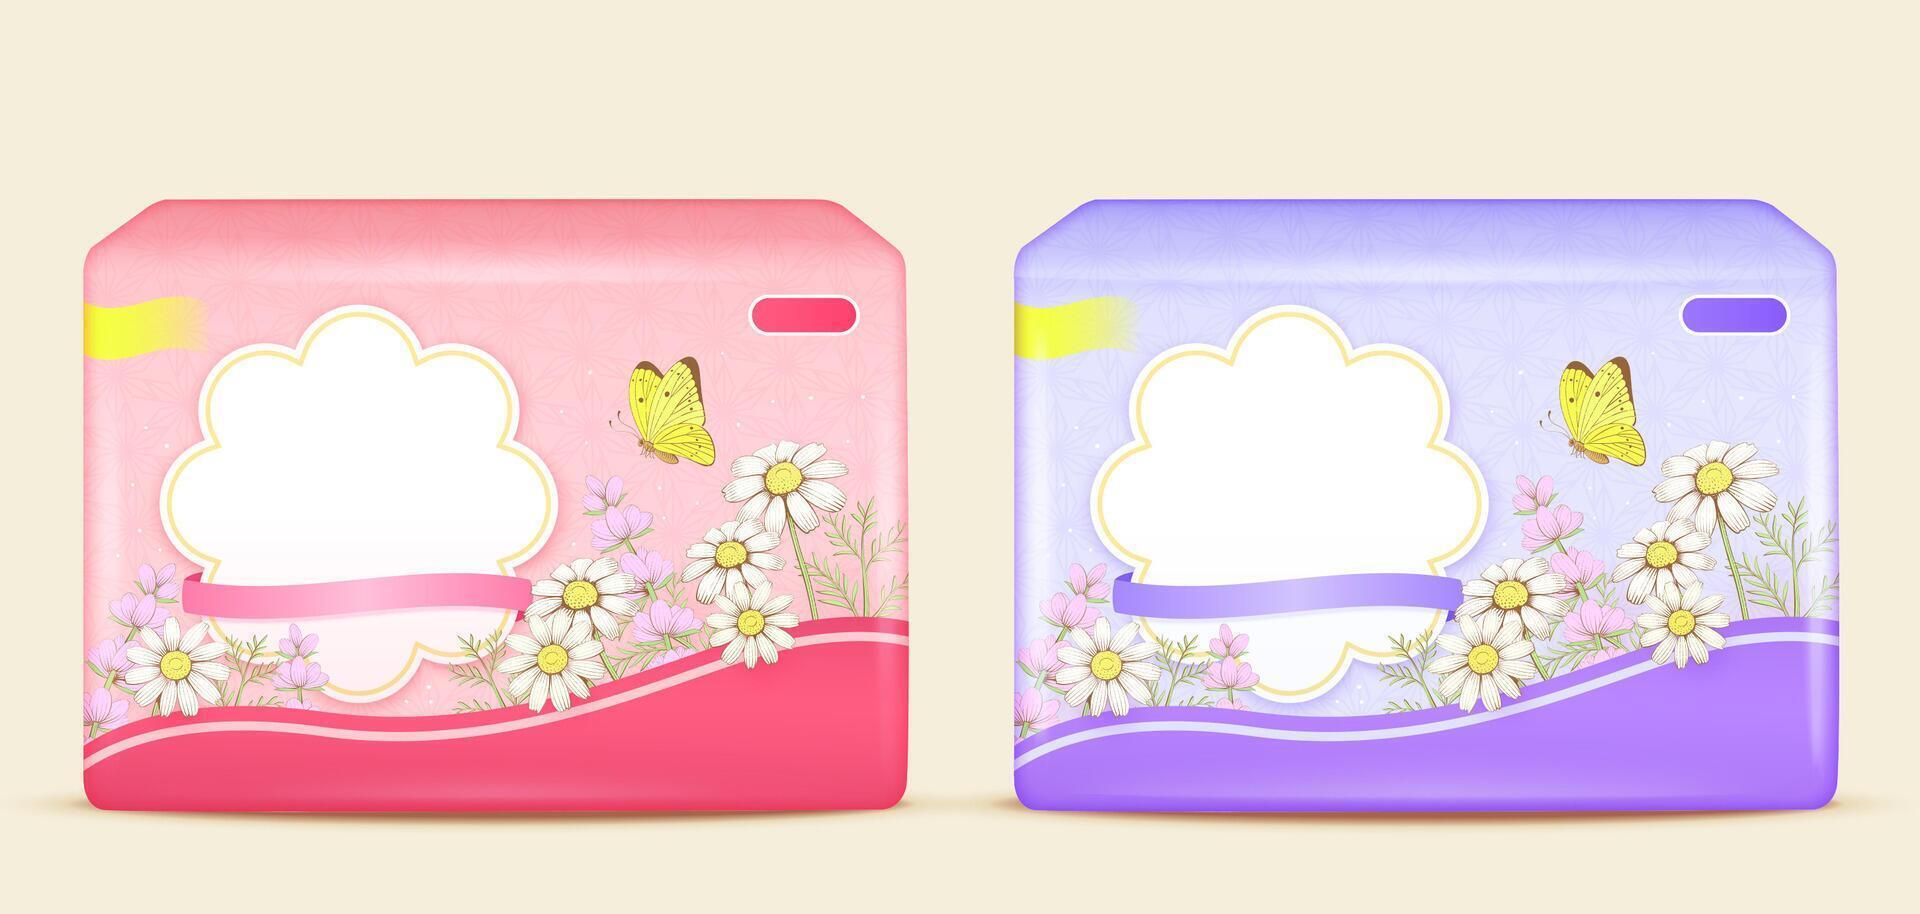 Realistic two sanitary pads packages with floral illustrations on the pack isolated on light yellow background vector